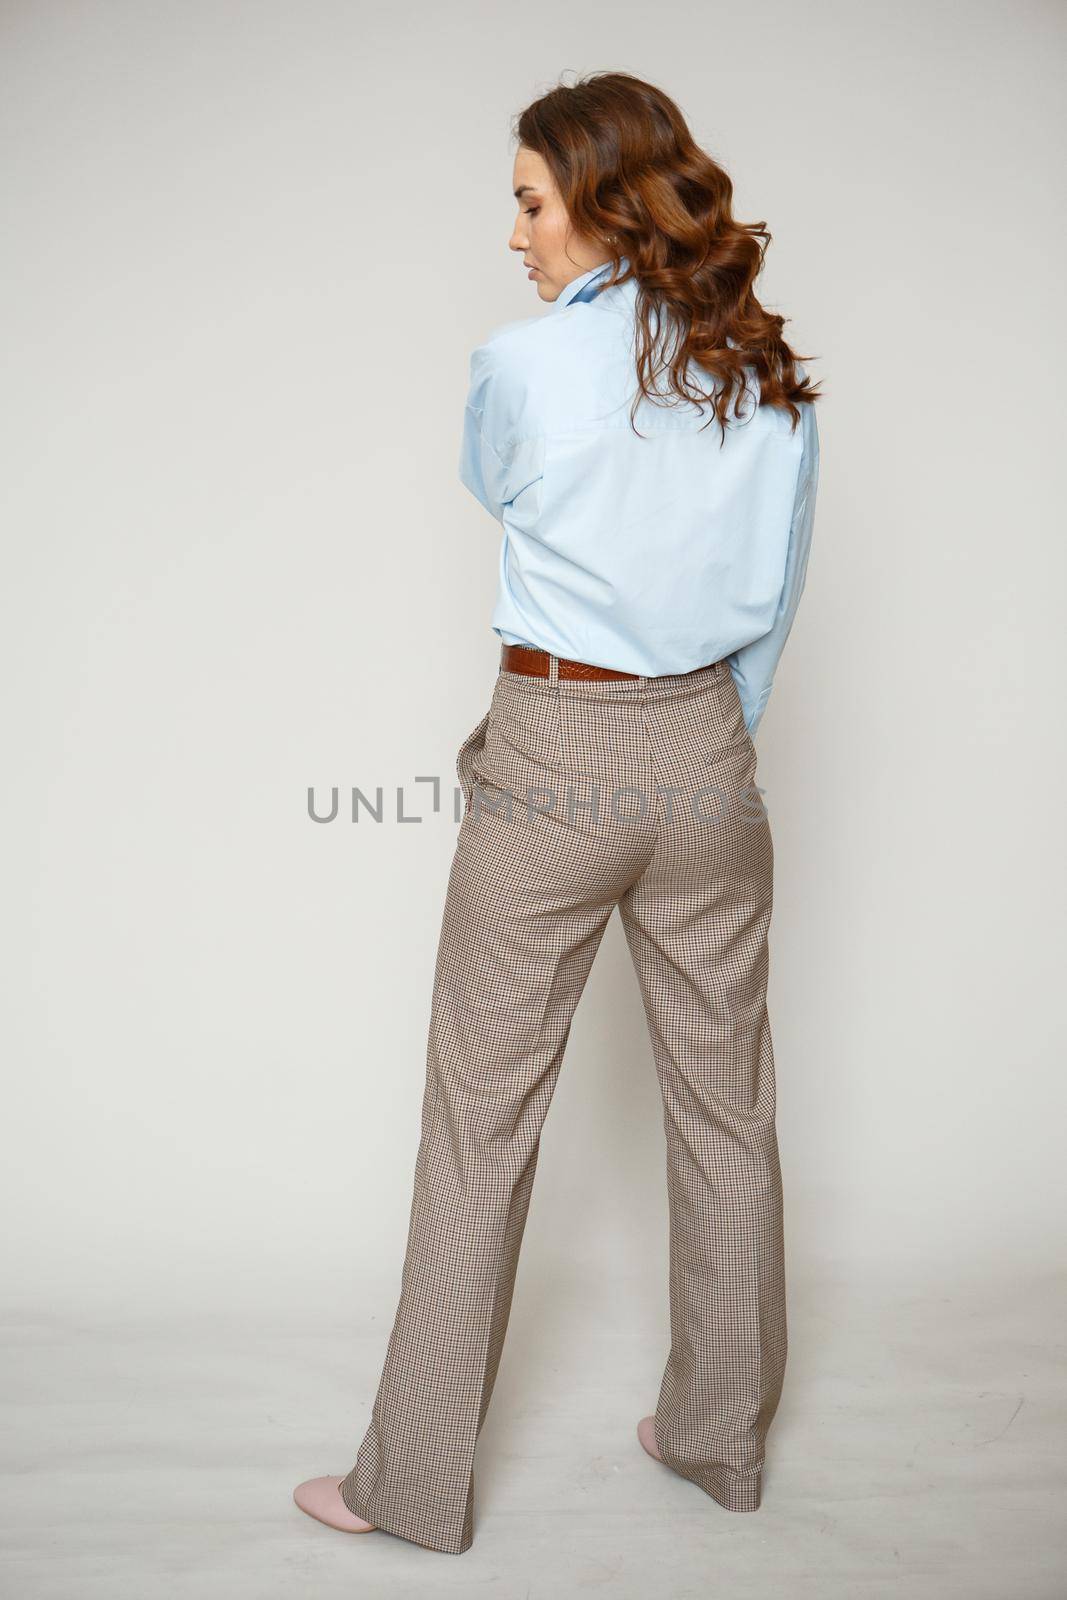 A girl in a blue shirt and trousers. Shooting fashion clothes by deandy